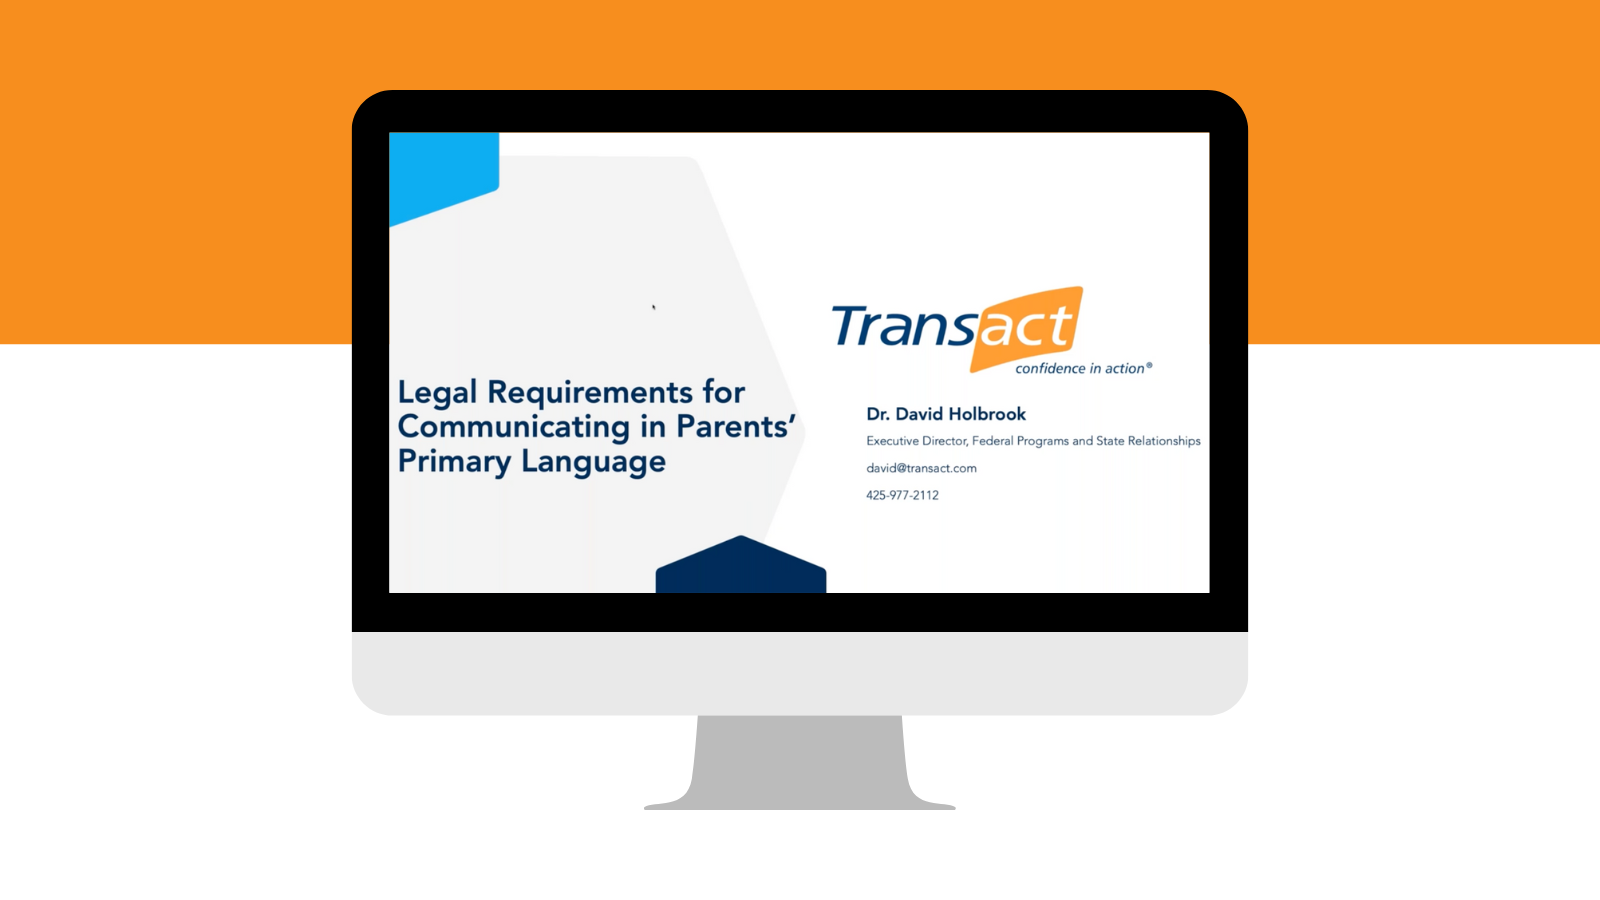 Legal Requirements for Providing Communications in Parents’ Primary Language